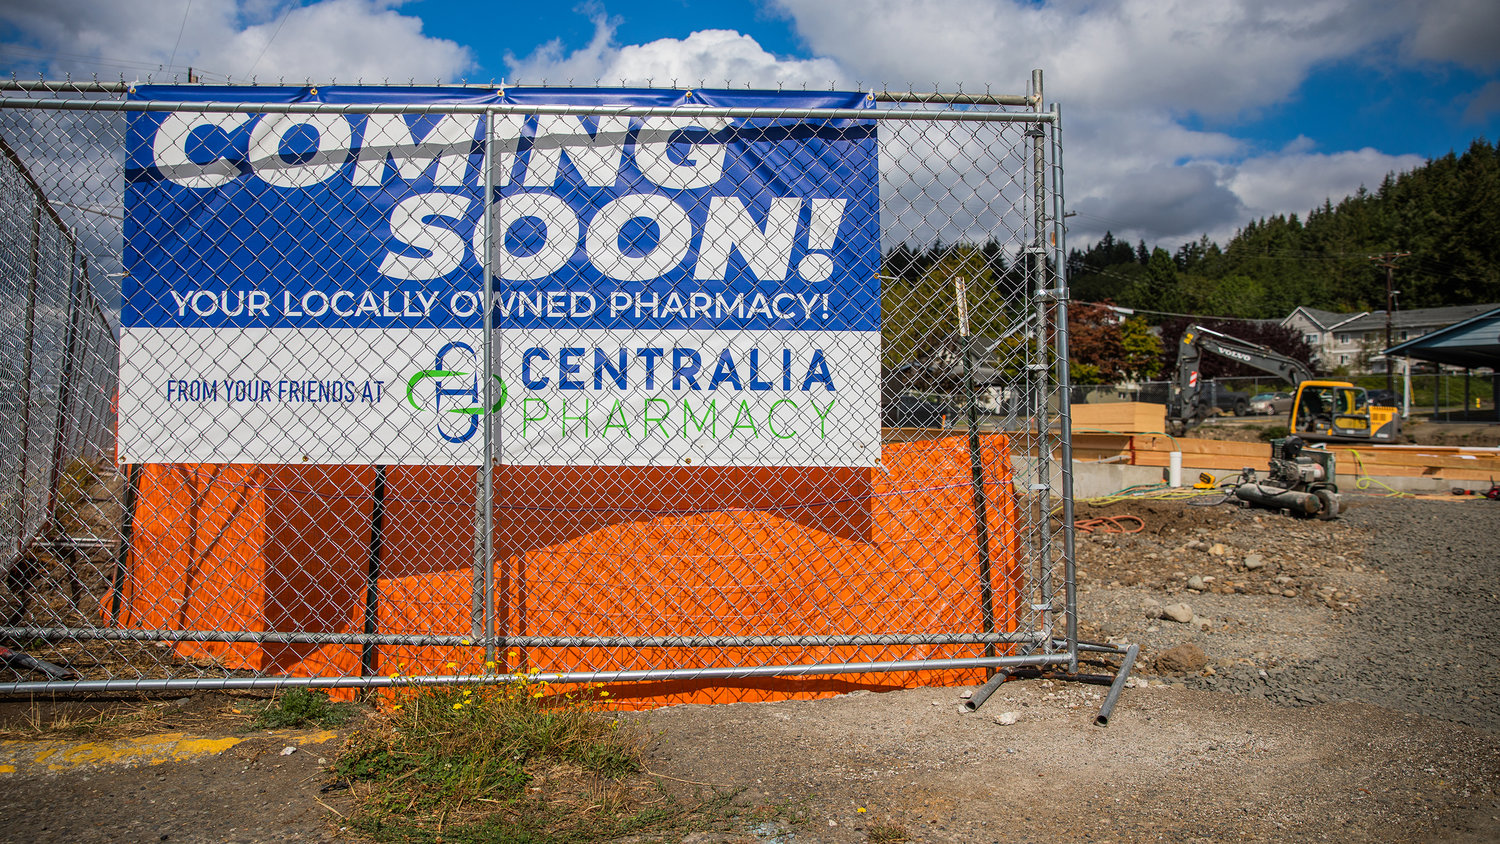 A sign is displayed along South Market Boulevard for a locally owned pharmacy coming soon to Chehalis.